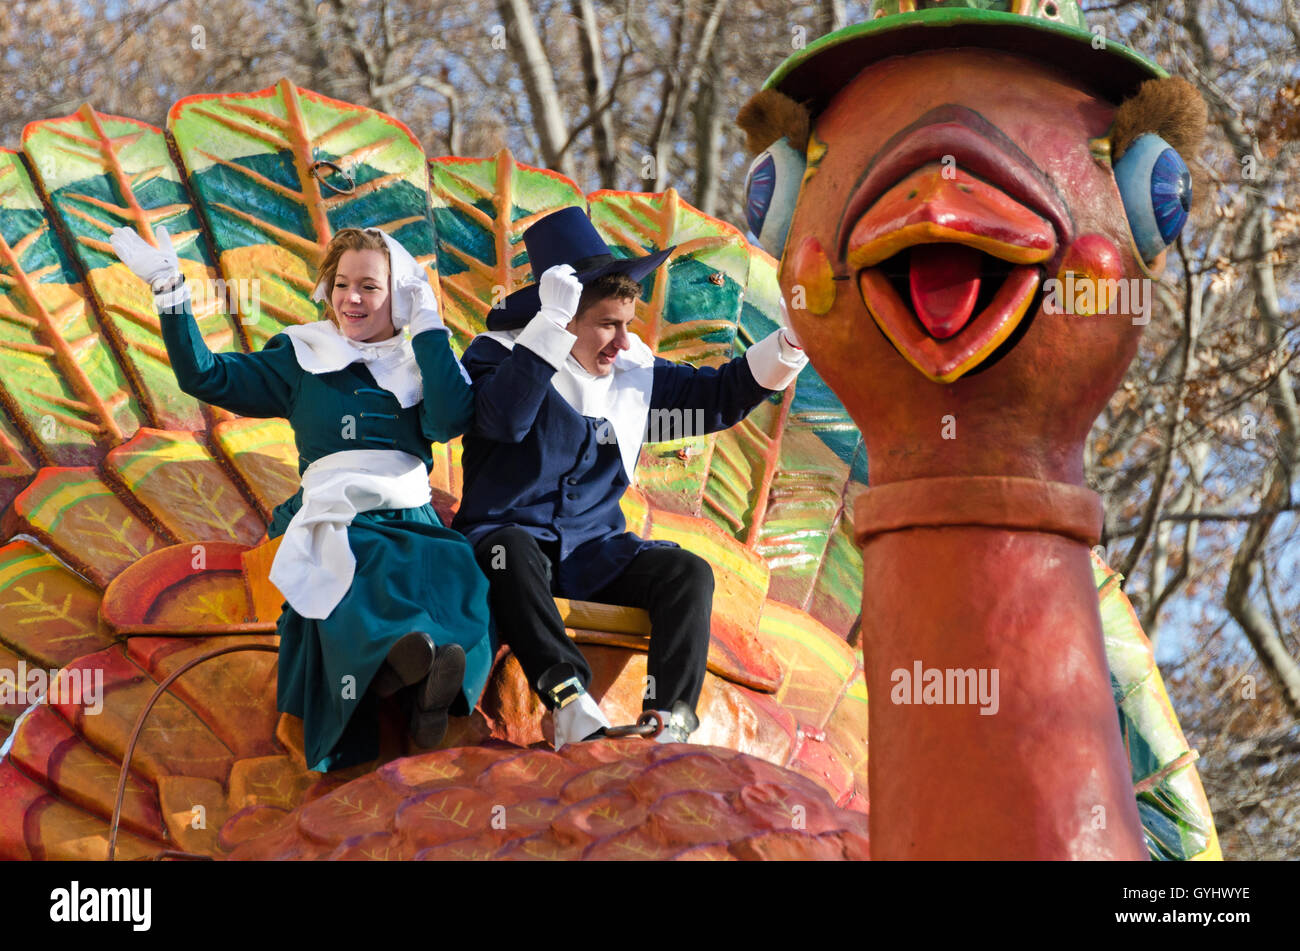 A Pilgrim couple waves from the Tom Turkey float in the Macy's Thanksgiving Day Parade, New York City. Stock Photo